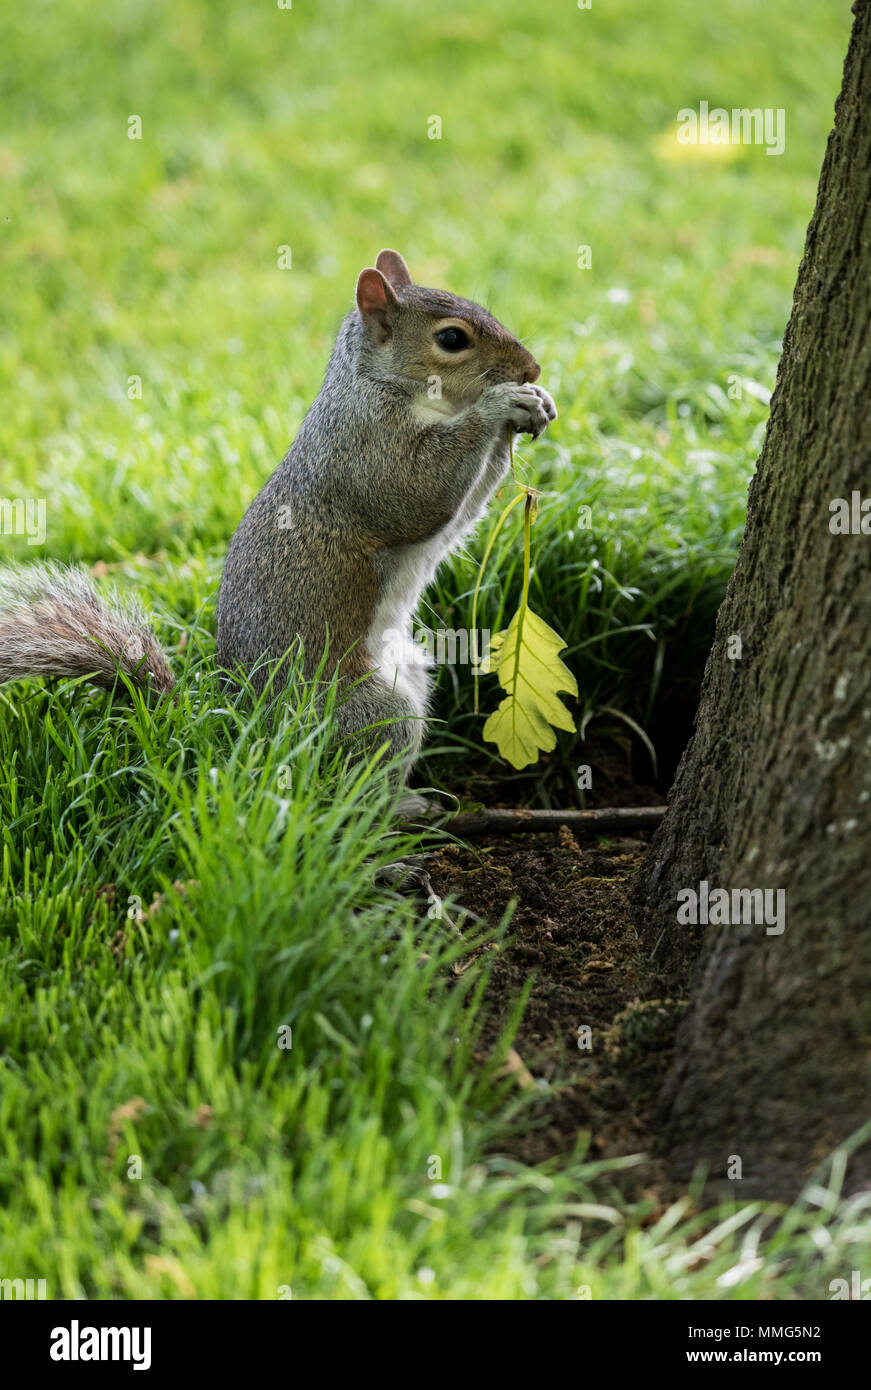 Cute squirrel holding a leaf Stock Photo